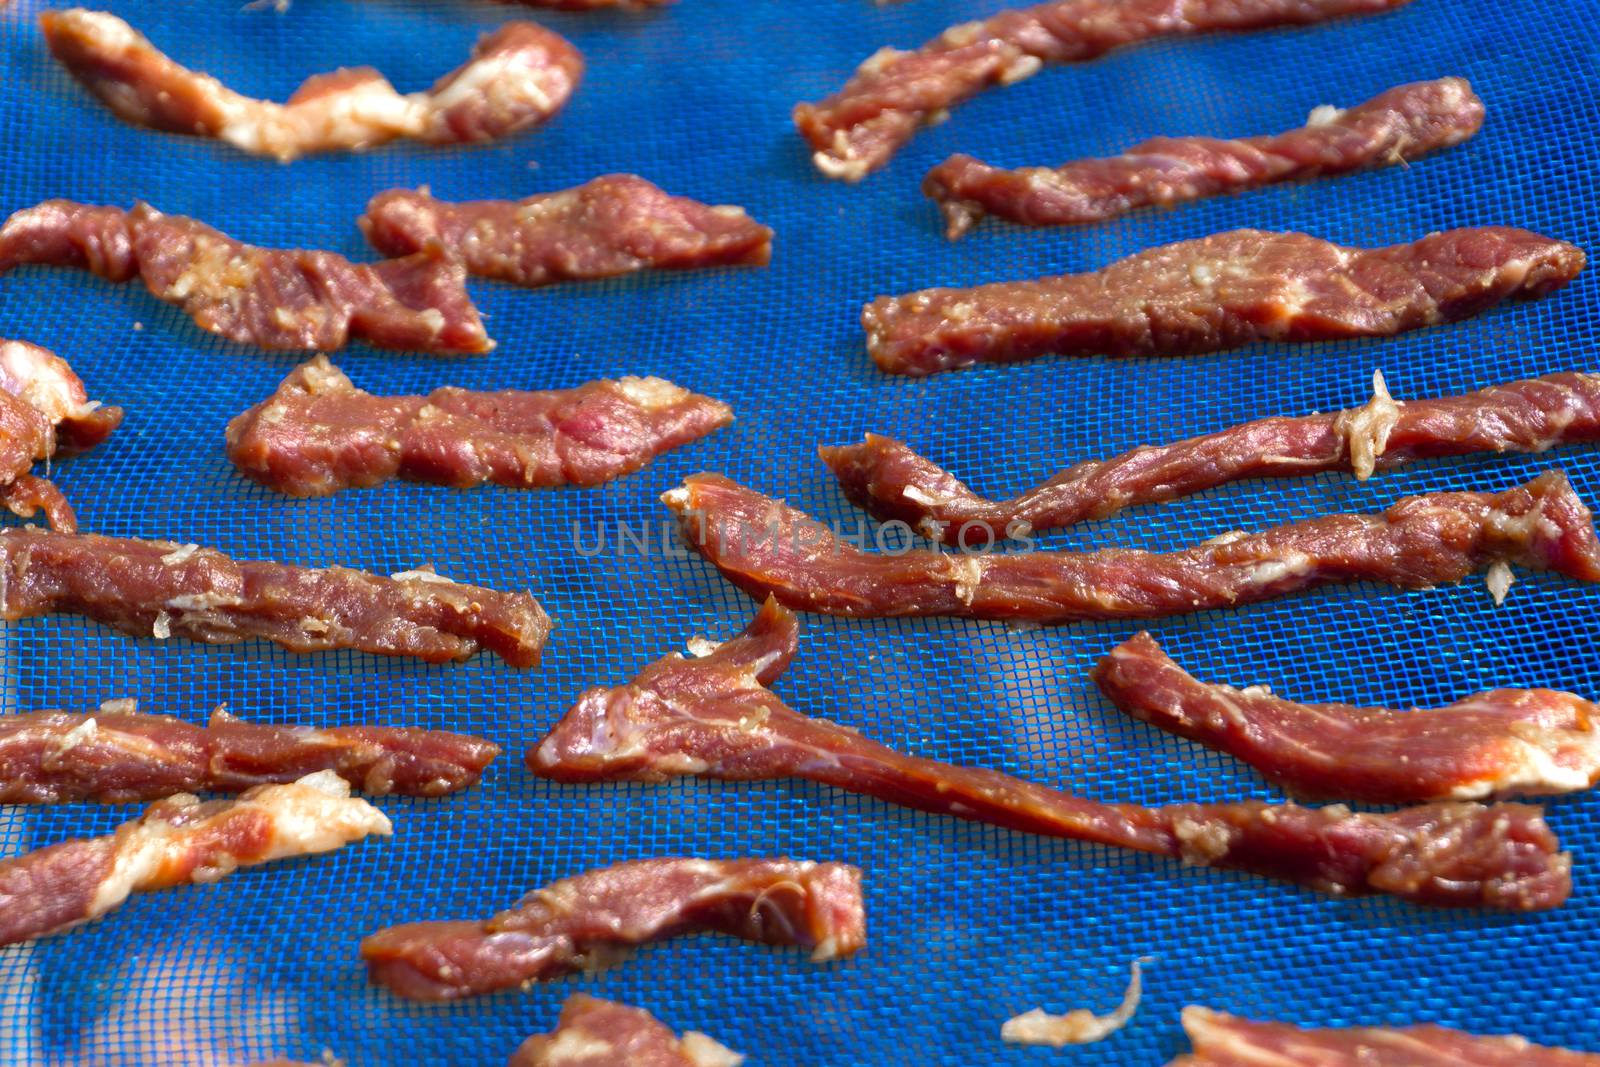 Dried meat is a feature of many cuisines around the world by pkproject